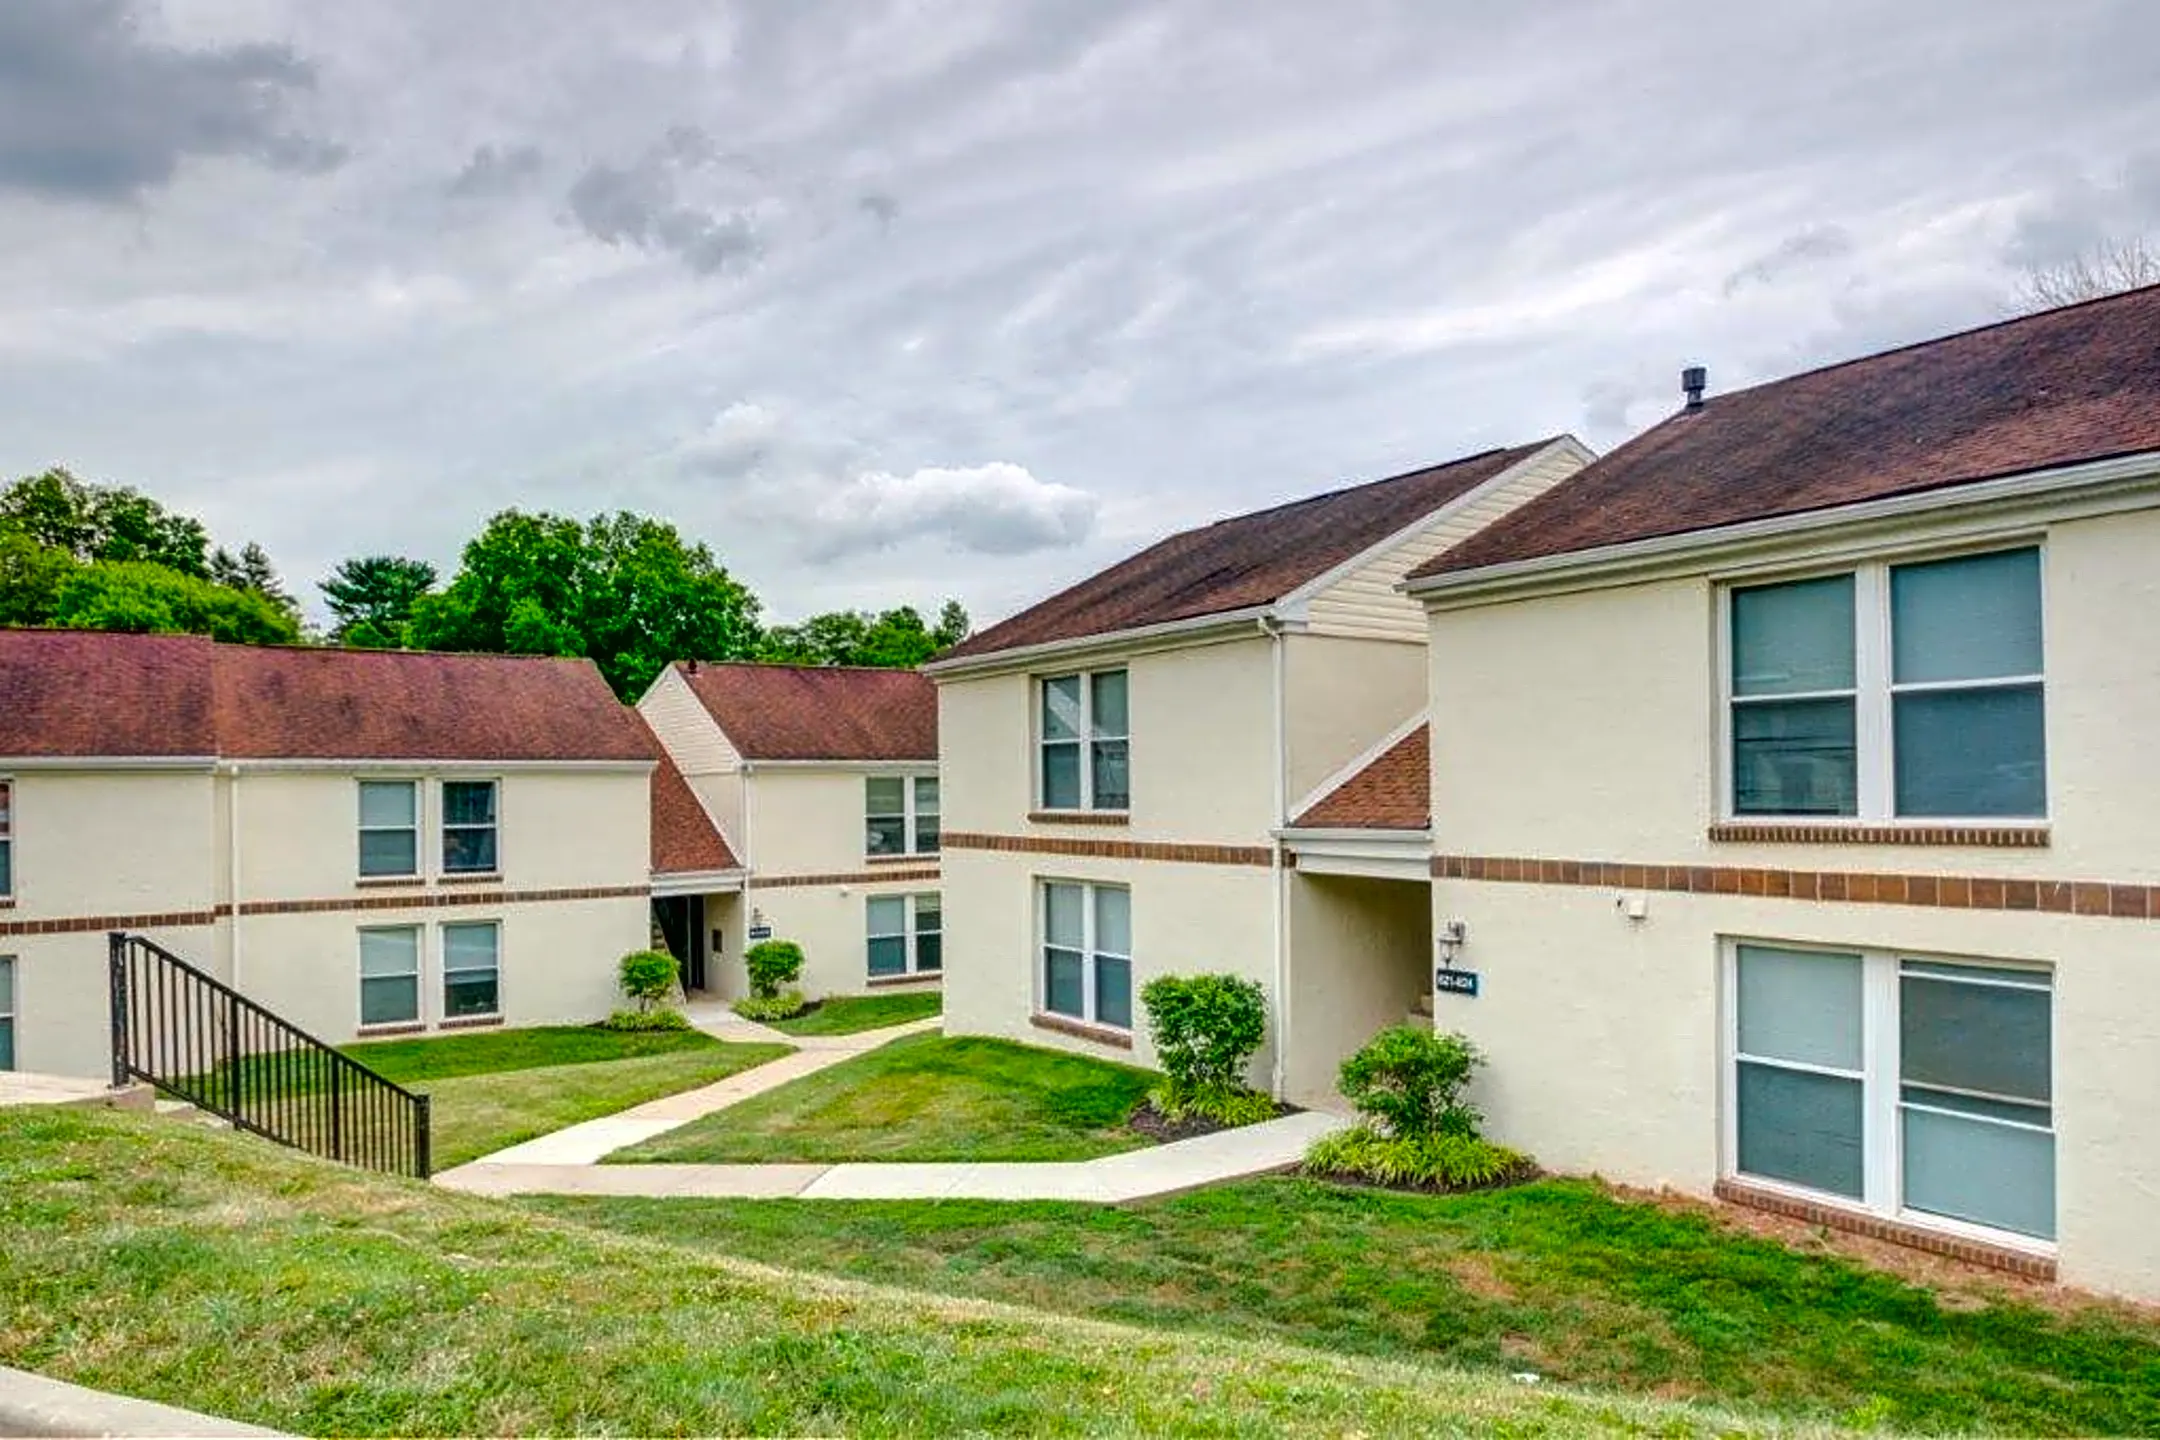 Building - Willowbrook Apartments - Jeffersonville, PA